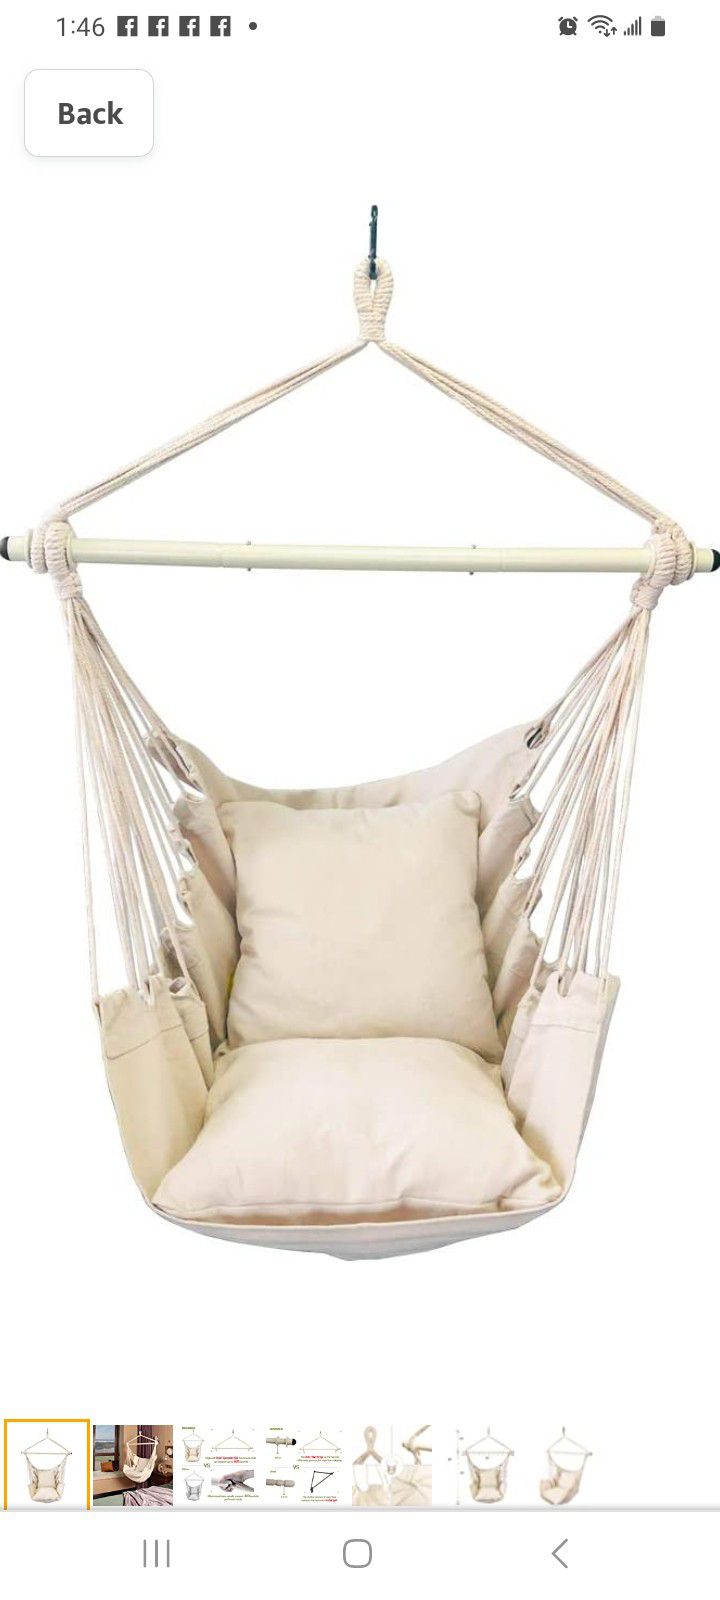 New Hanging Chair Grey And Beige Available 